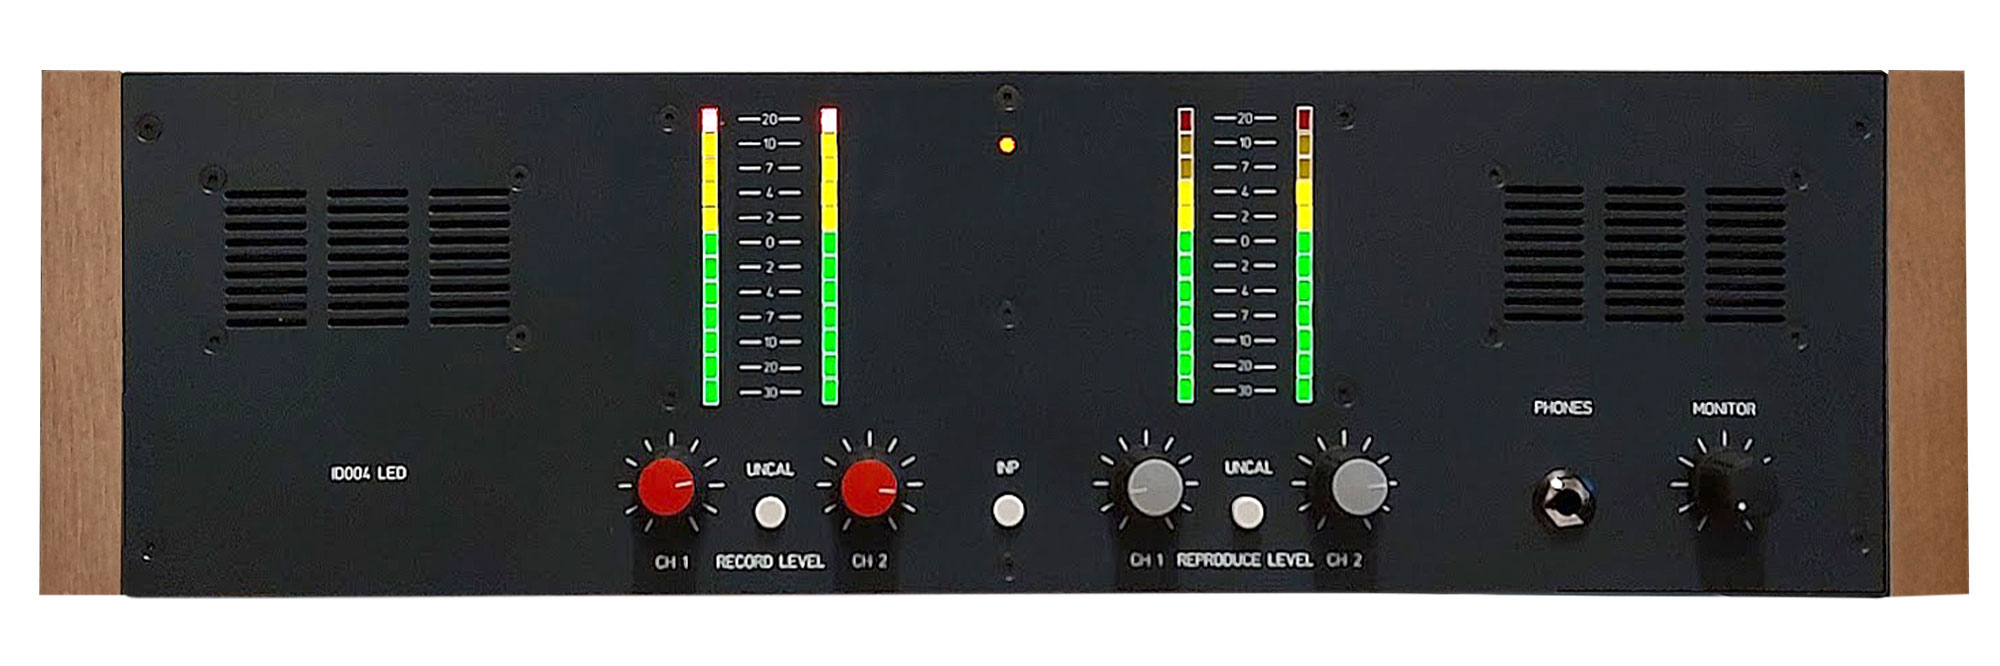 Deportes Indica gesto New LED VU Meter Bridge Unit for Studer Reel to Reel A807, A810, A67, B67,  C37 - Reel to Reel World